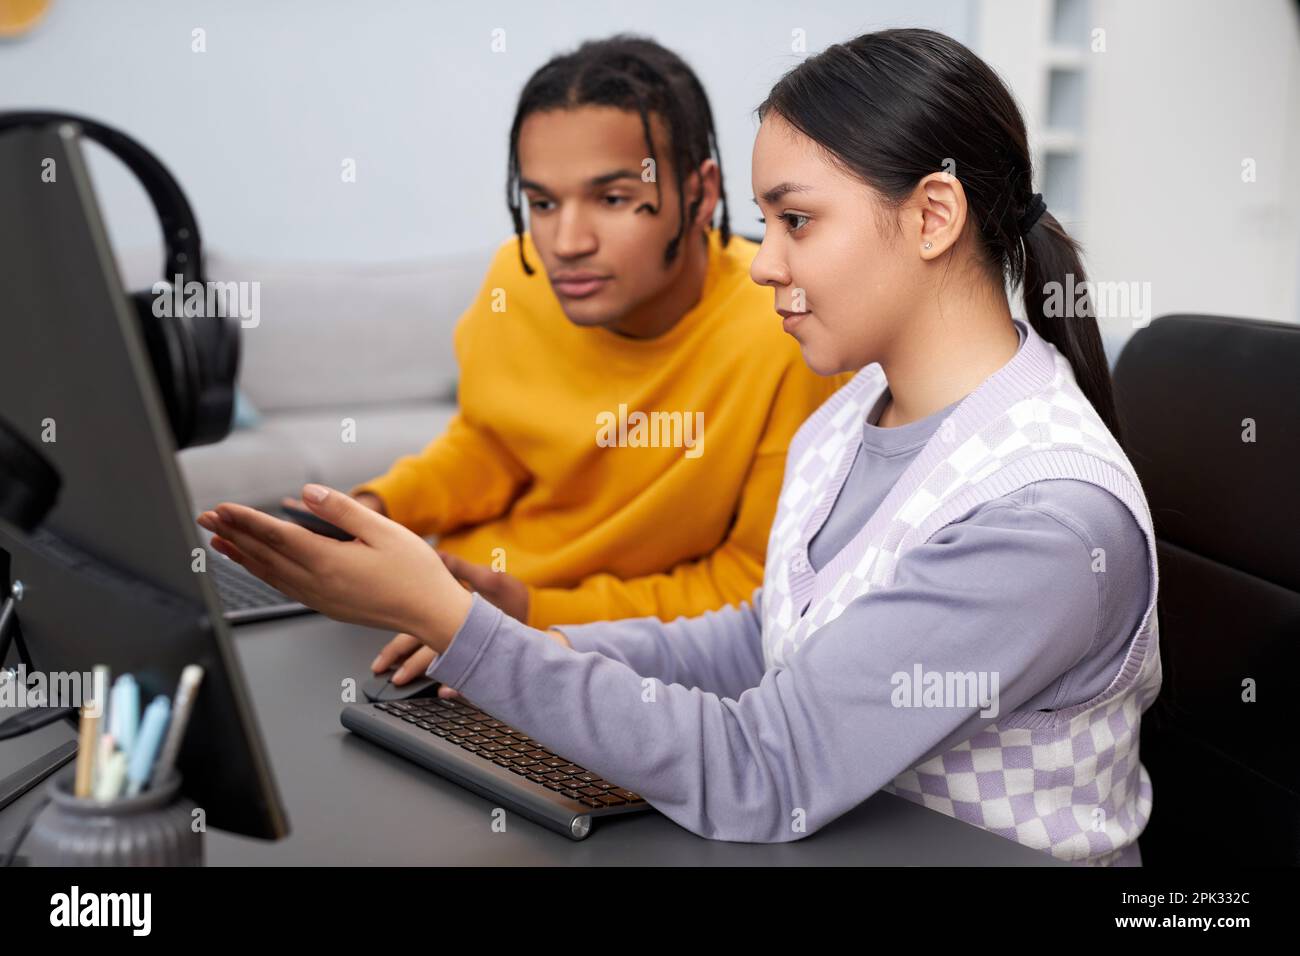 Two young people writing code in office with focus on multiethnic woman pointing at computer screen Stock Photo